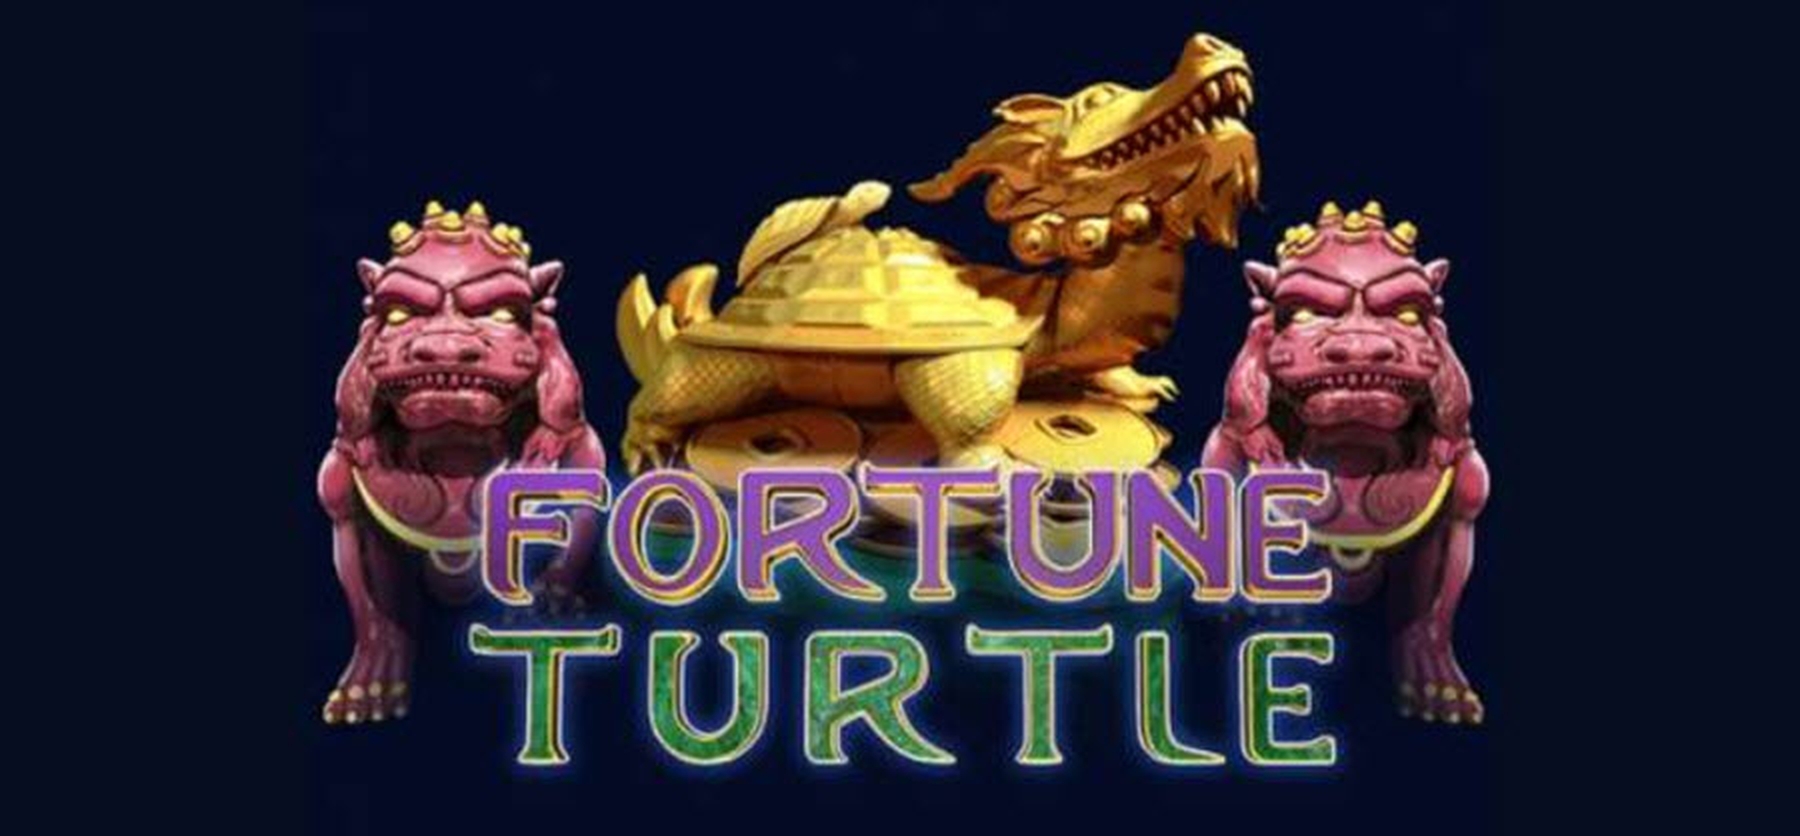 The Fortune turtle Online Slot Demo Game by Genesis Gaming